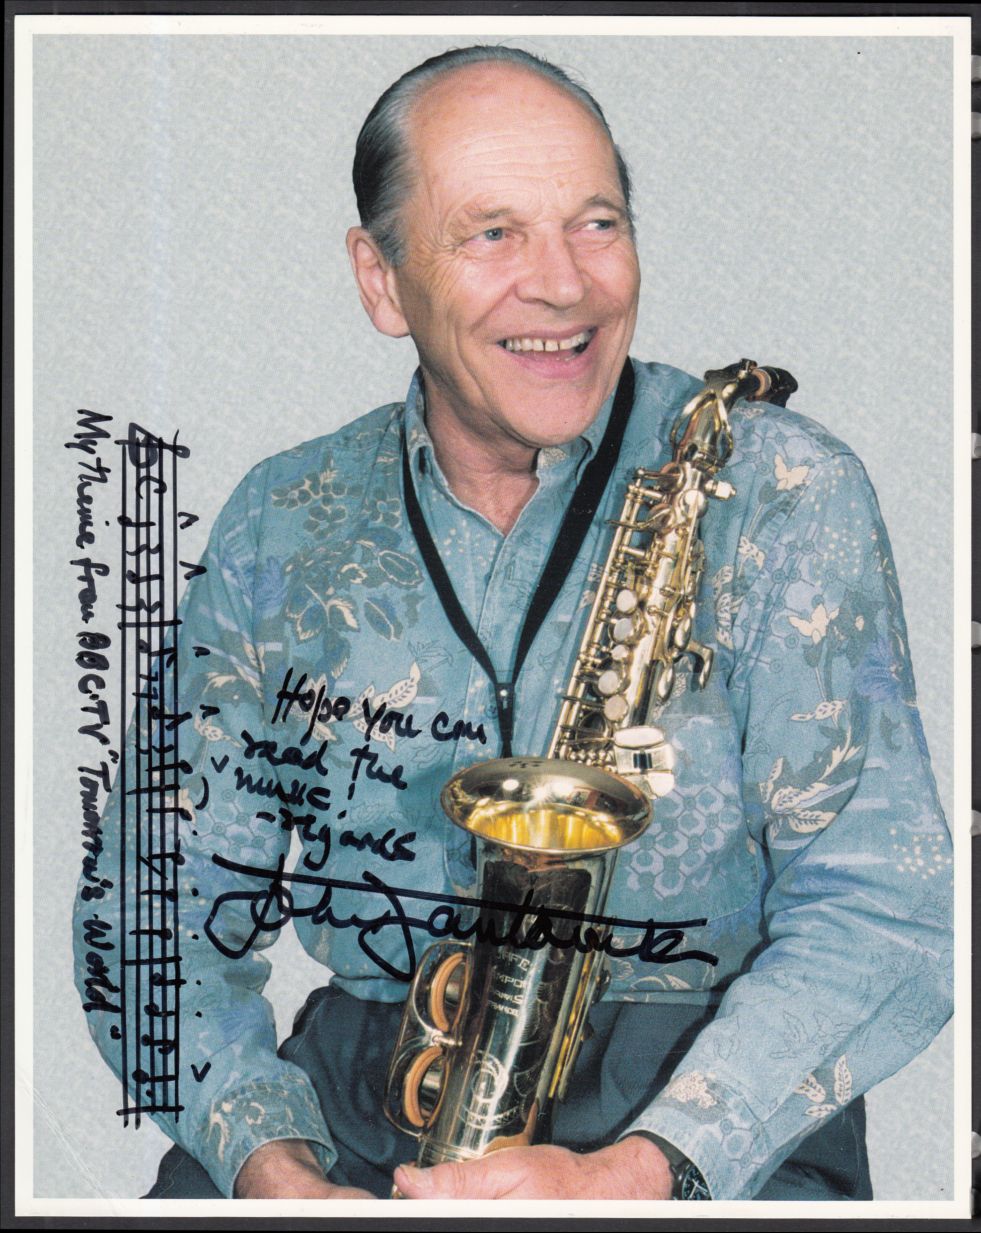 John Dankworth (1927-2010): Autographed musical quote on 10" x 8" colour photo. Crease in bottom